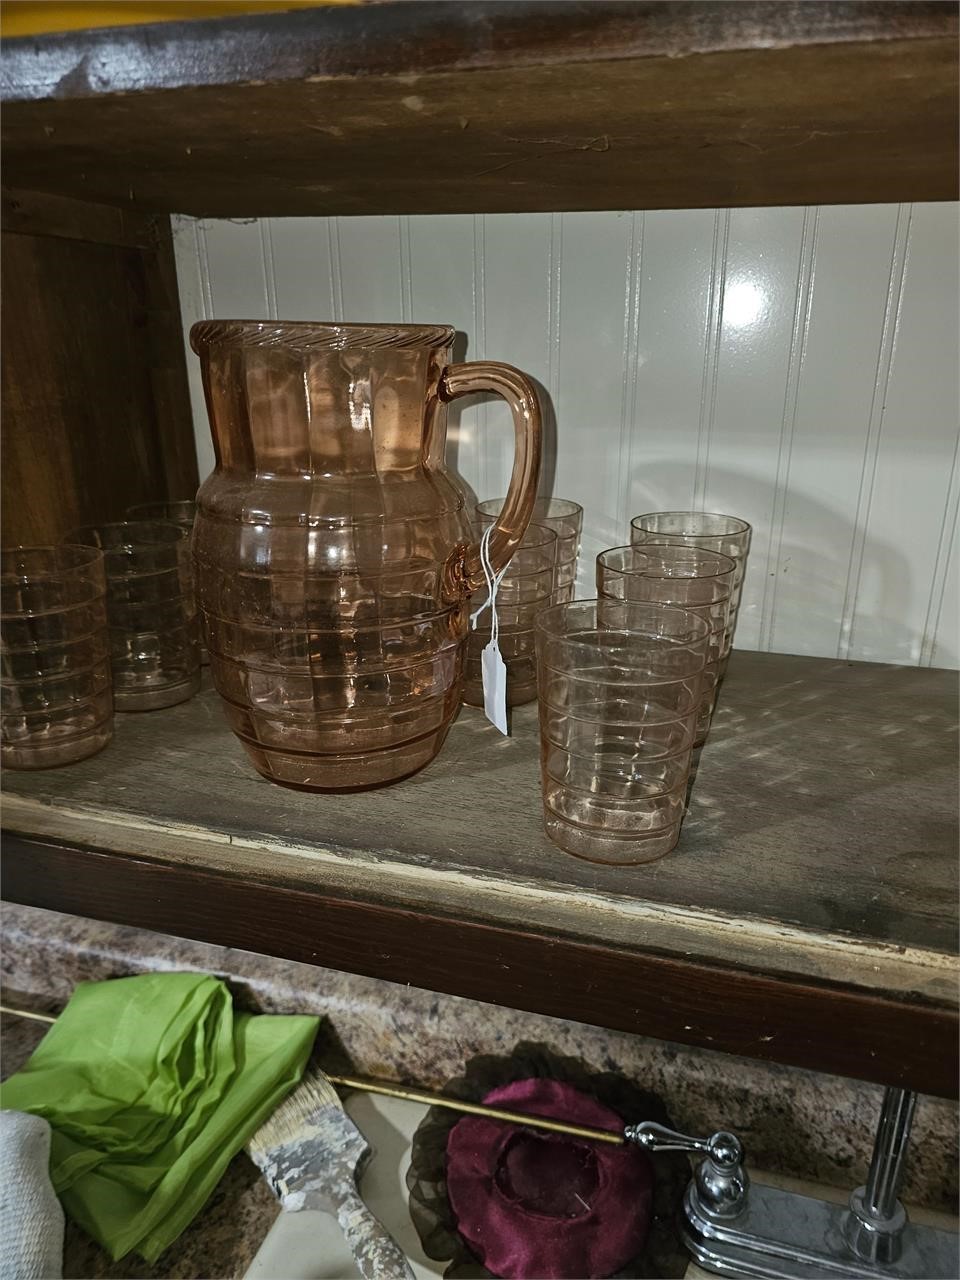 Pink depression glass pitcher and 10 cup set